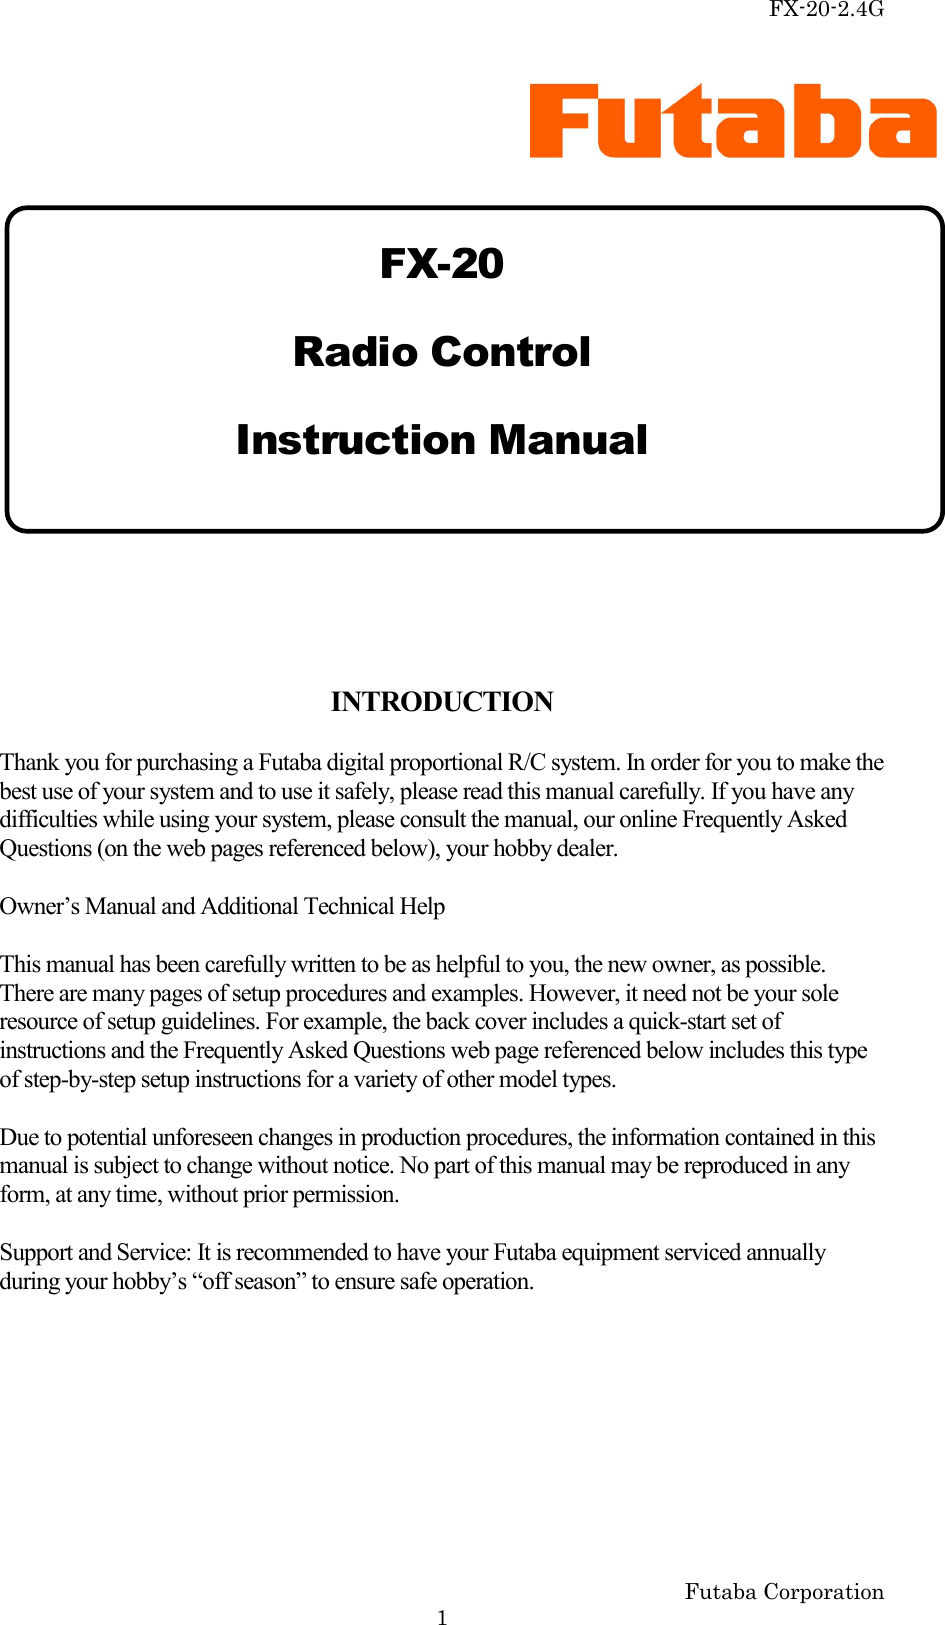 FX-20-2.4G Futaba Corporation   1   FX-20 Radio Control Instruction Manual    INTRODUCTION Thank you for purchasing a Futaba digital proportional R/C system. In order for you to make the best use of your system and to use it safely, please read this manual carefully. If you have any difficulties while using your system, please consult the manual, our online Frequently Asked Questions (on the web pages referenced below), your hobby dealer. Owner’s Manual and Additional Technical Help This manual has been carefully written to be as helpful to you, the new owner, as possible. There are many pages of setup procedures and examples. However, it need not be your sole resource of setup guidelines. For example, the back cover includes a quick-start set of instructions and the Frequently Asked Questions web page referenced below includes this type of step-by-step setup instructions for a variety of other model types. Due to potential unforeseen changes in production procedures, the information contained in this manual is subject to change without notice. No part of this manual may be reproduced in any form, at any time, without prior permission. Support and Service: It is recommended to have your Futaba equipment serviced annually during your hobby’s “off season” to ensure safe operation. 